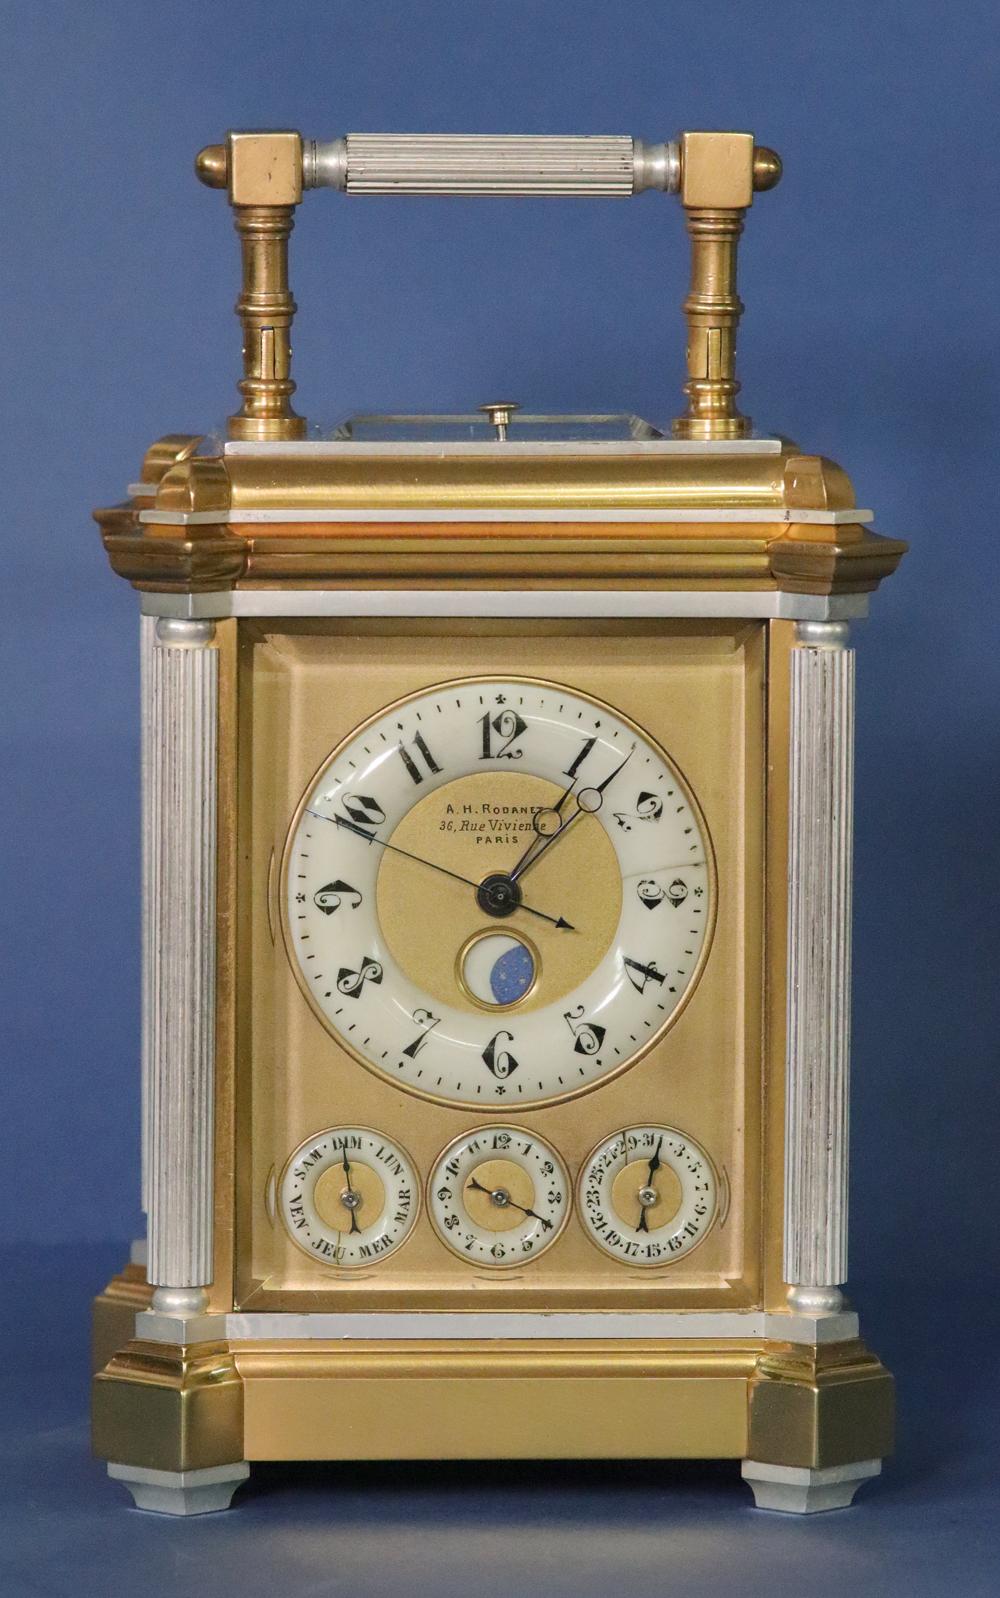 A.H.Rodanet, Paris

The silvered and gilt-bronze case has canted corners with reeded columns, a hinged handle and beveled glasses to 5 sides.
The dial has bone chapter rings with Arabic numbers for the hours, alarm and date, the days of the week